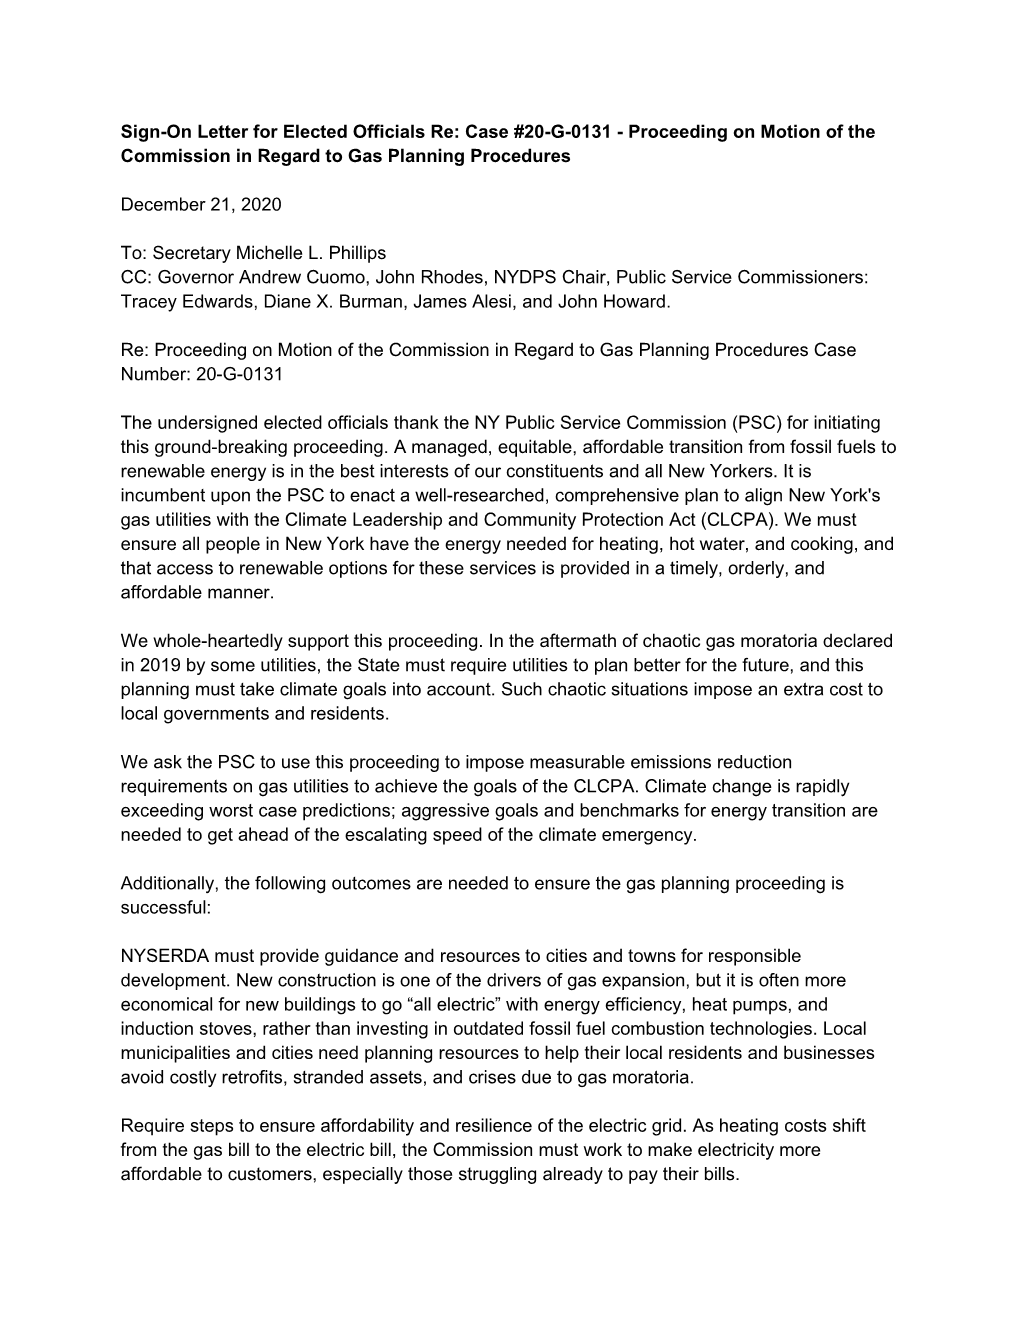 Sign-On Letter for Elected Officials Re: Case #20-G-0131 - Proceeding on Motion of the Commission in Regard to Gas Planning Procedures